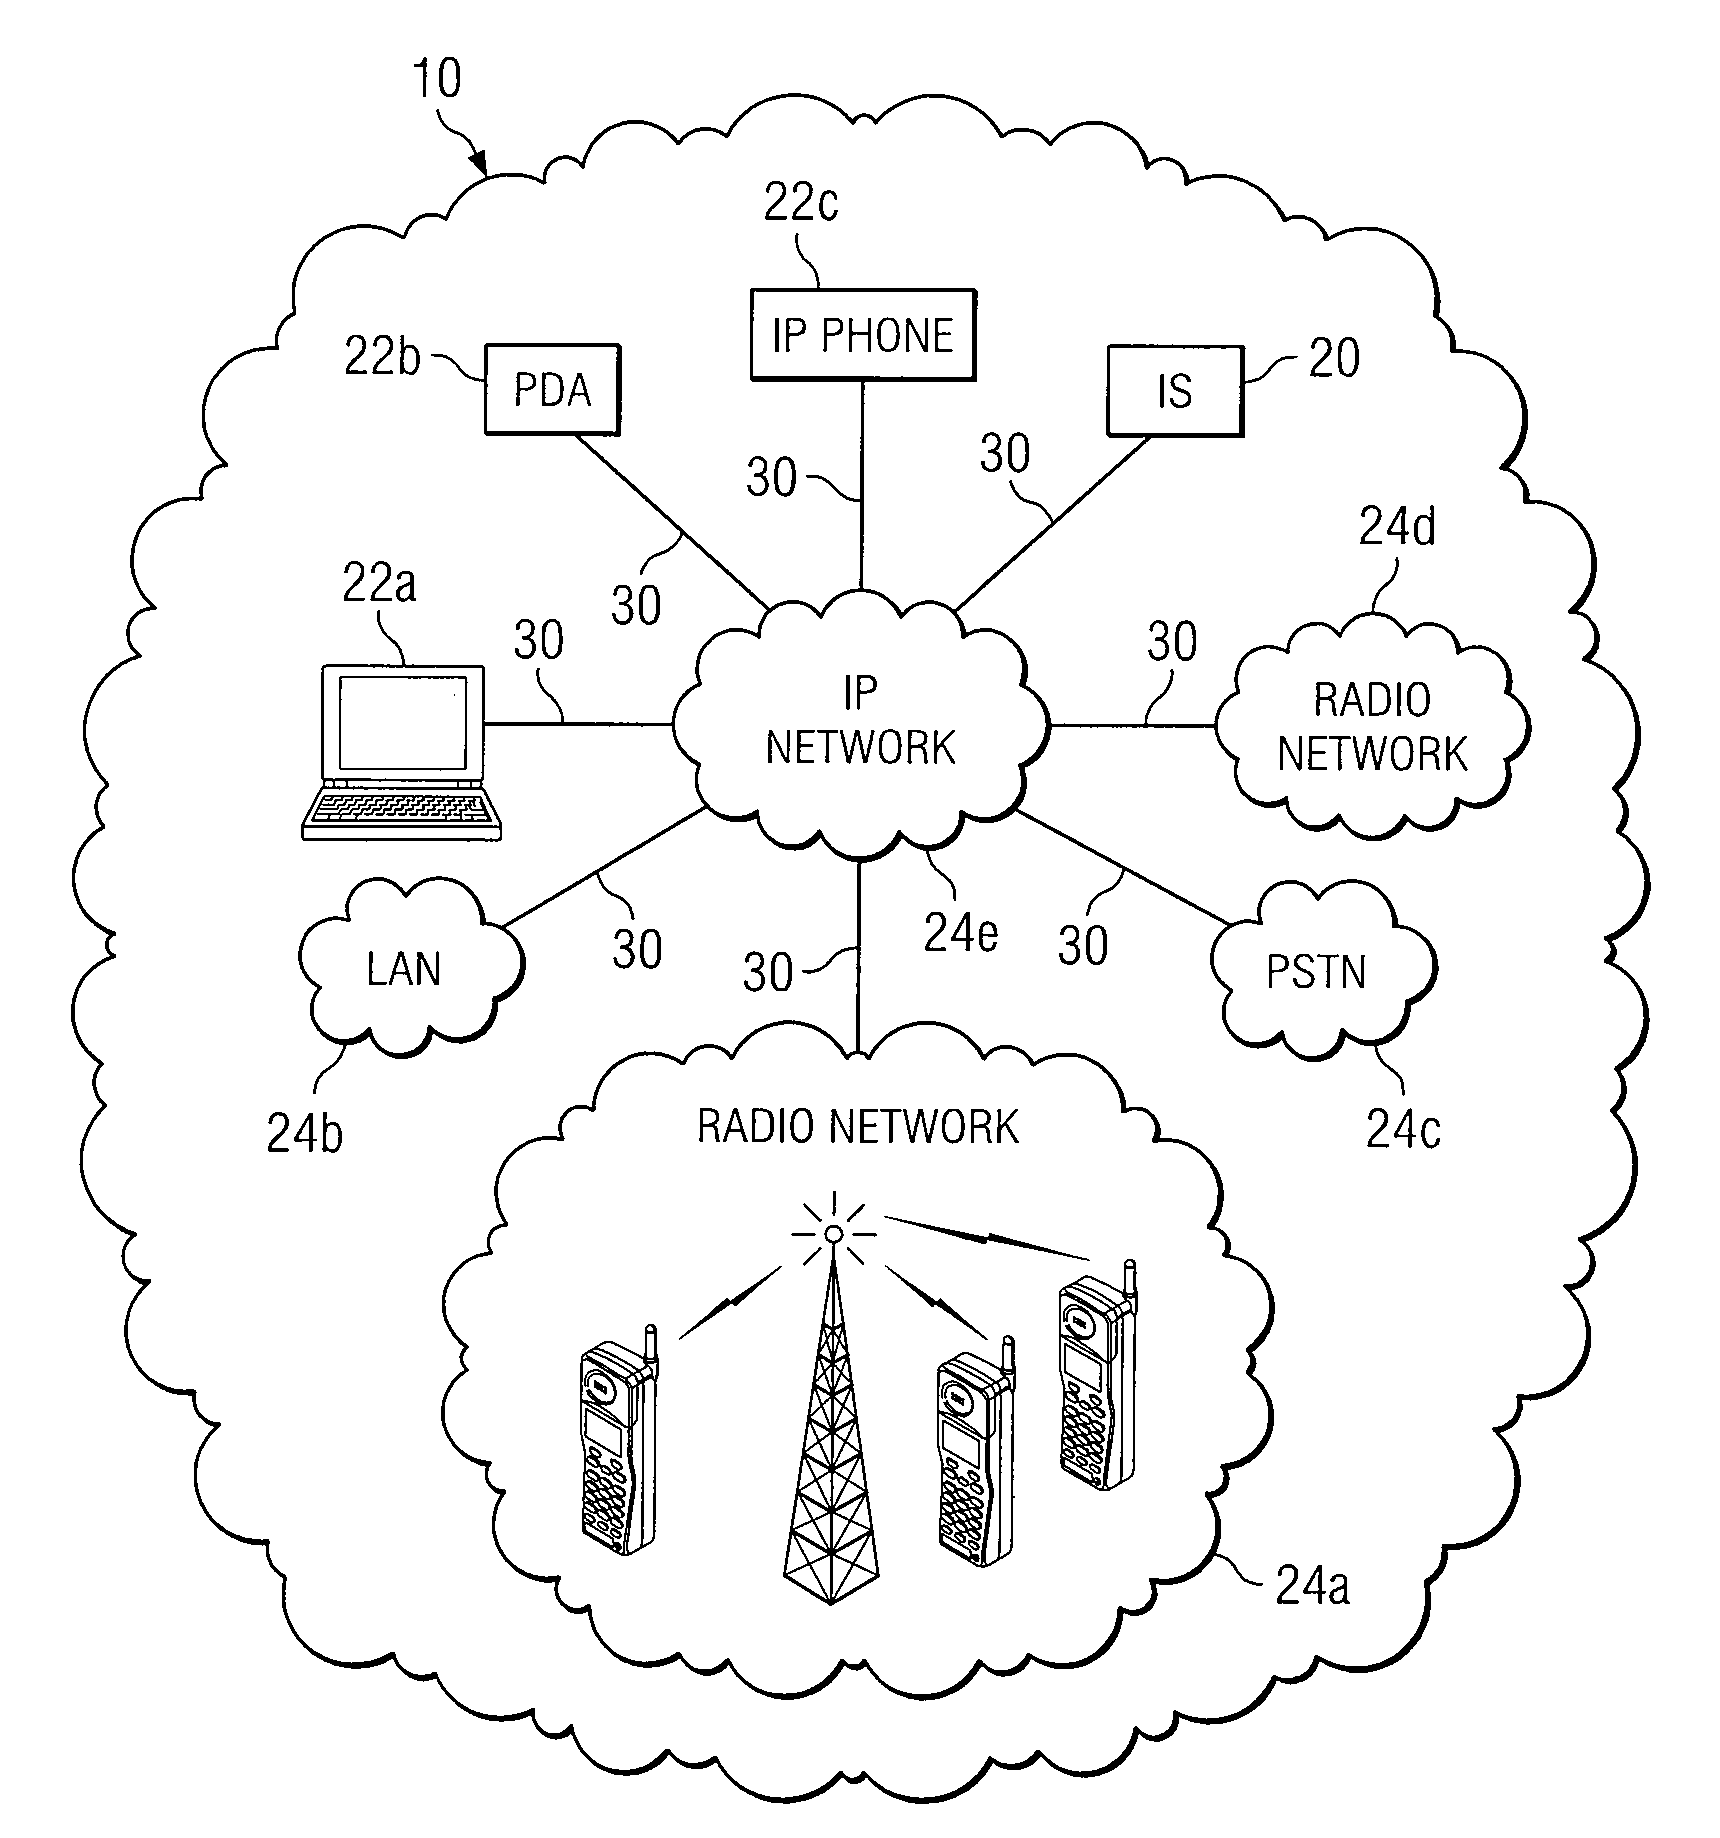 Method and System for Handling Dynamic Incidents